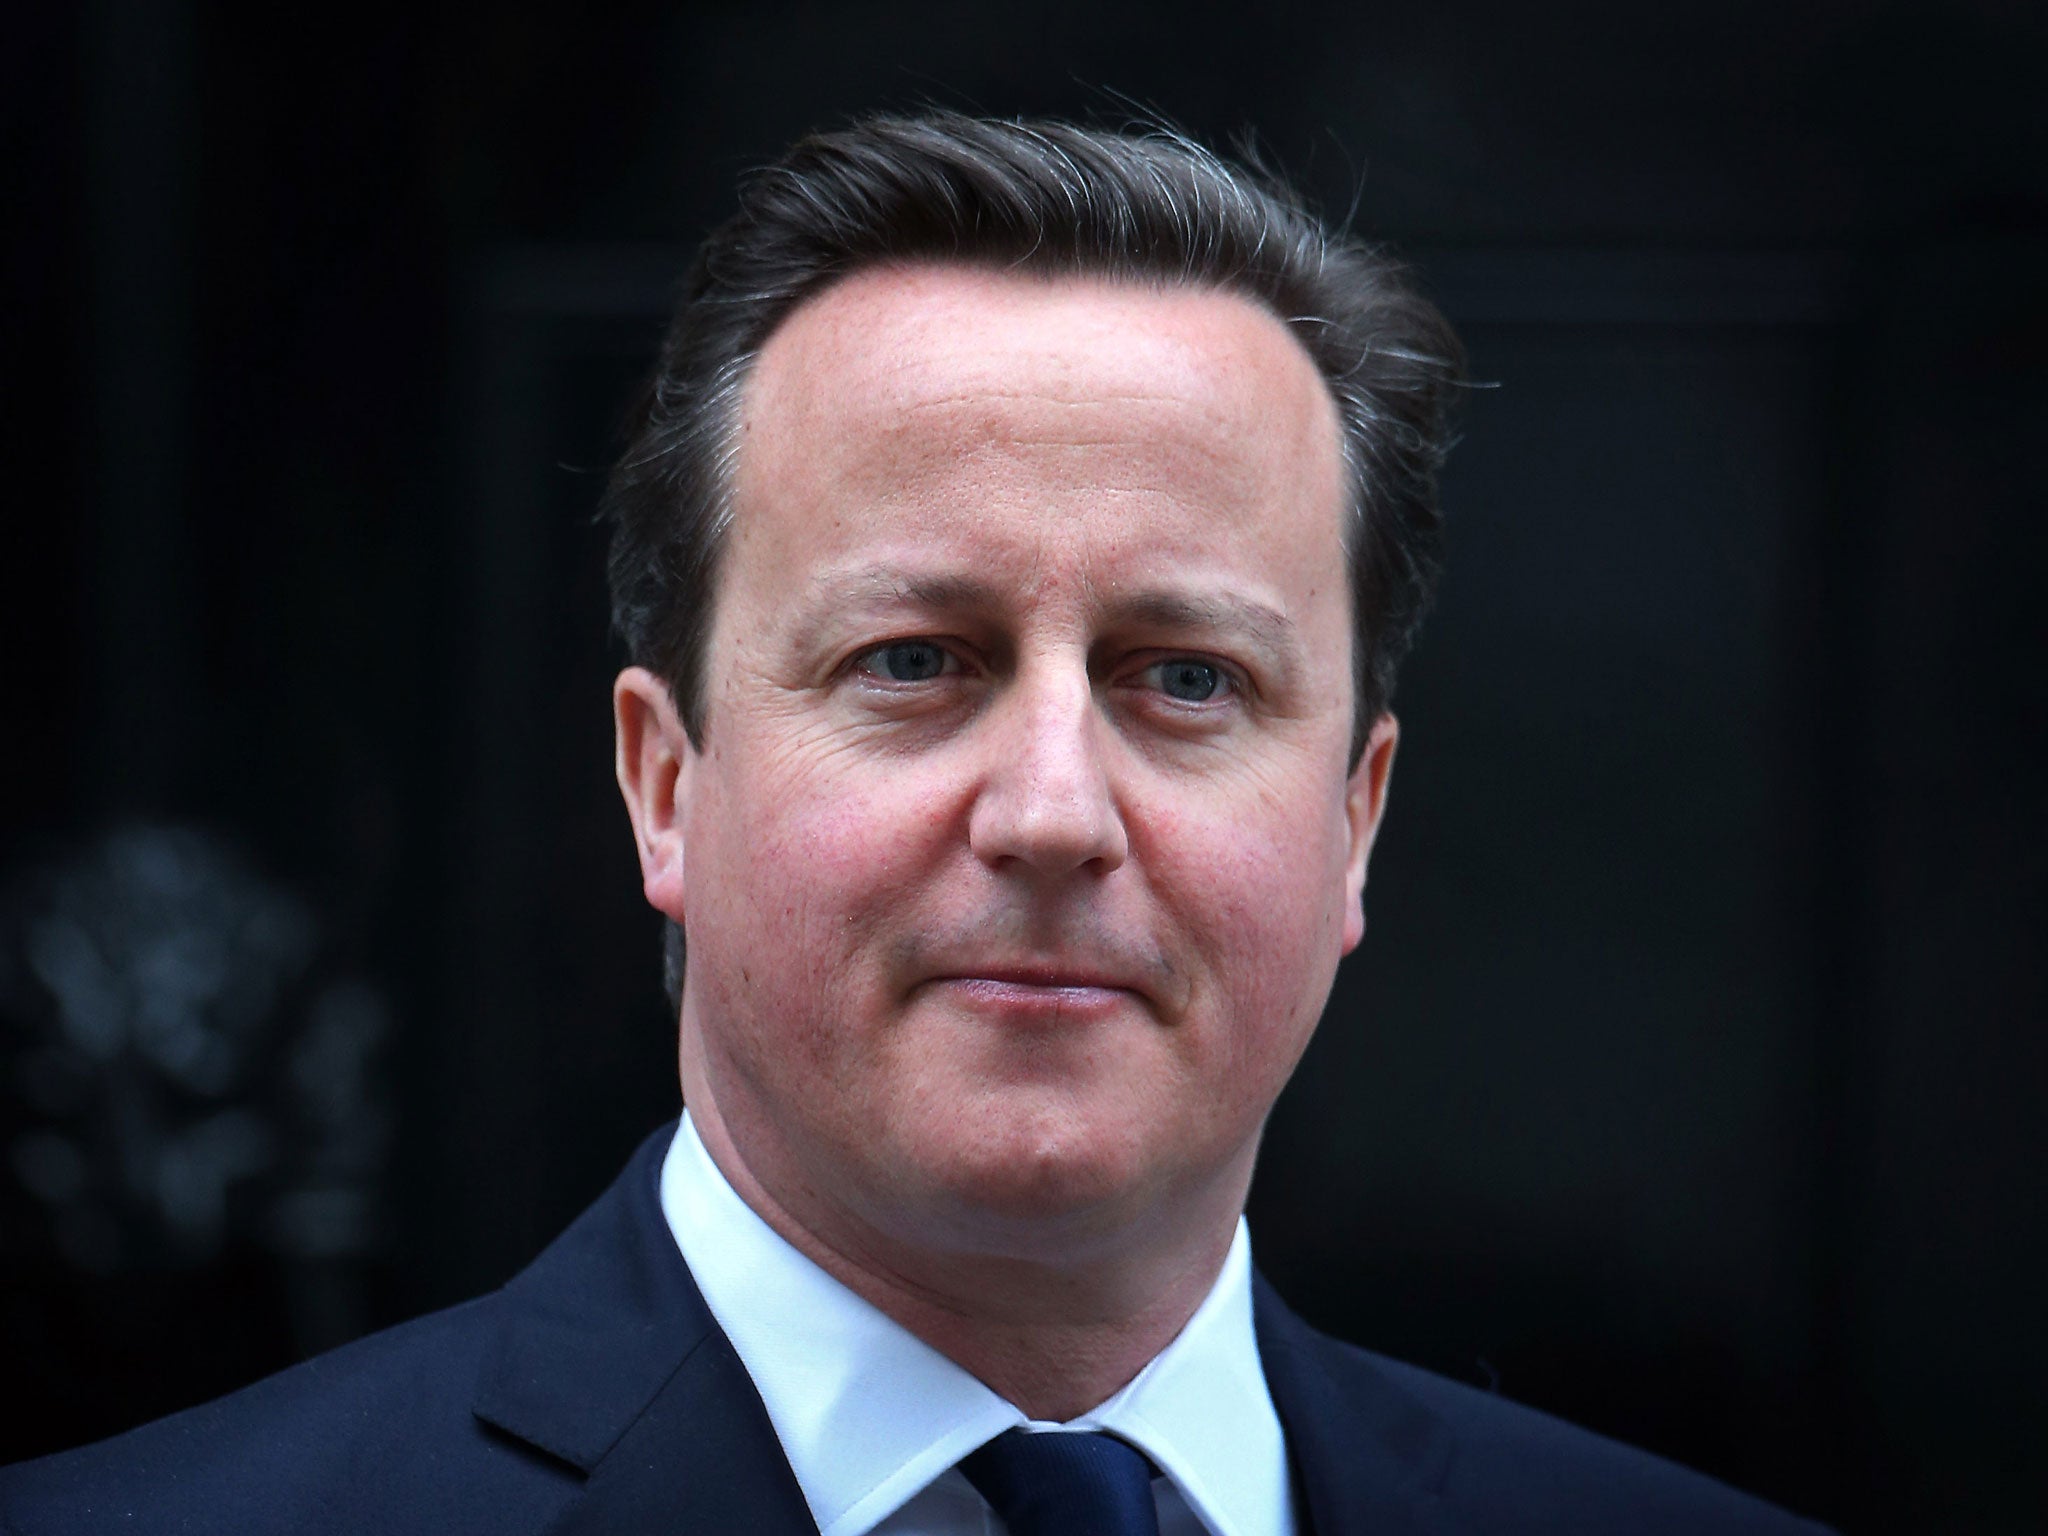 David Cameron has called on people to 'react calmly' following the lawful killing verdict in the Mark Duggan inquest